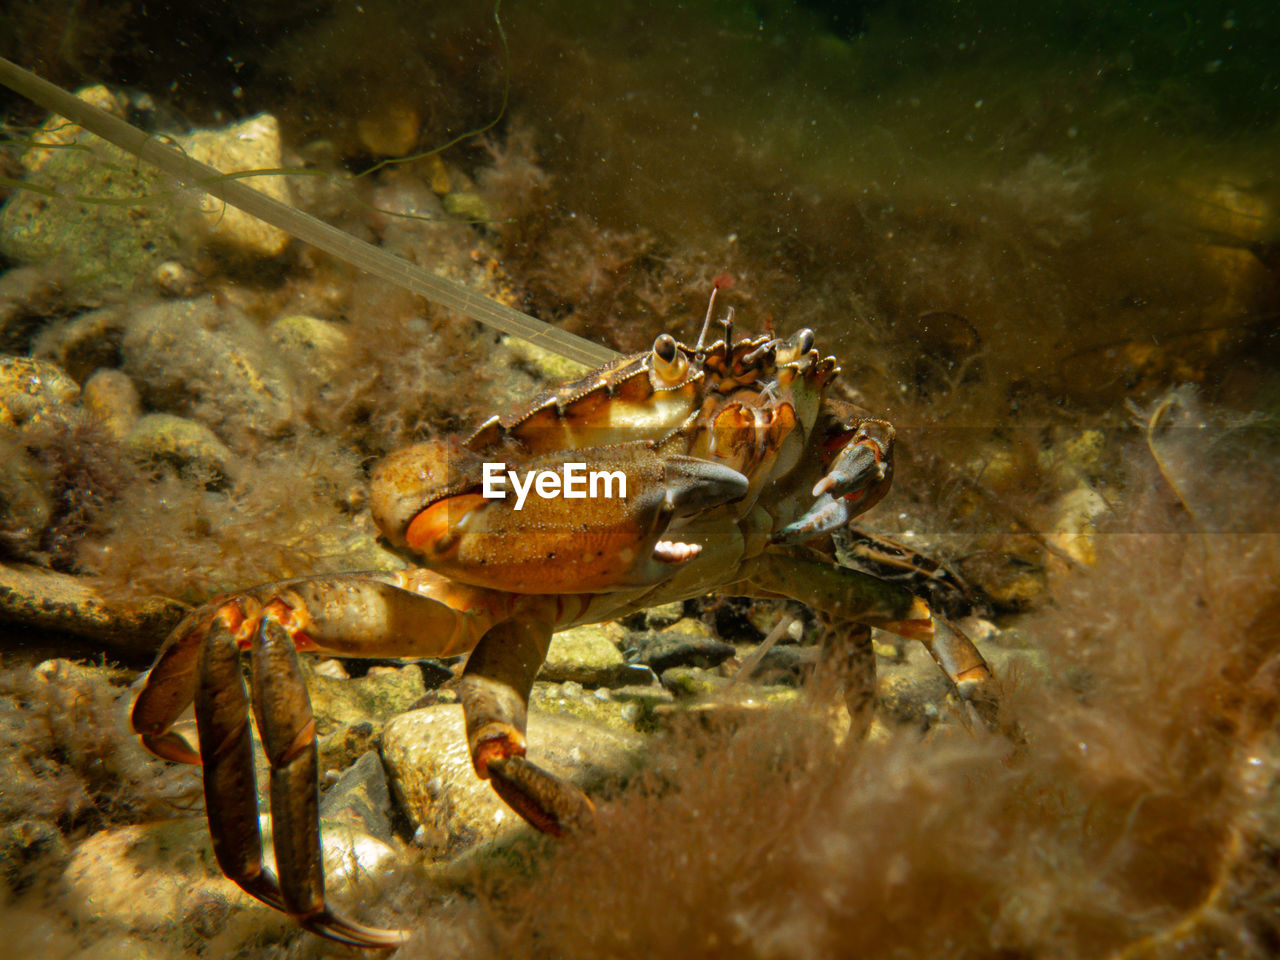 CLOSE-UP OF CRAB ON SEA